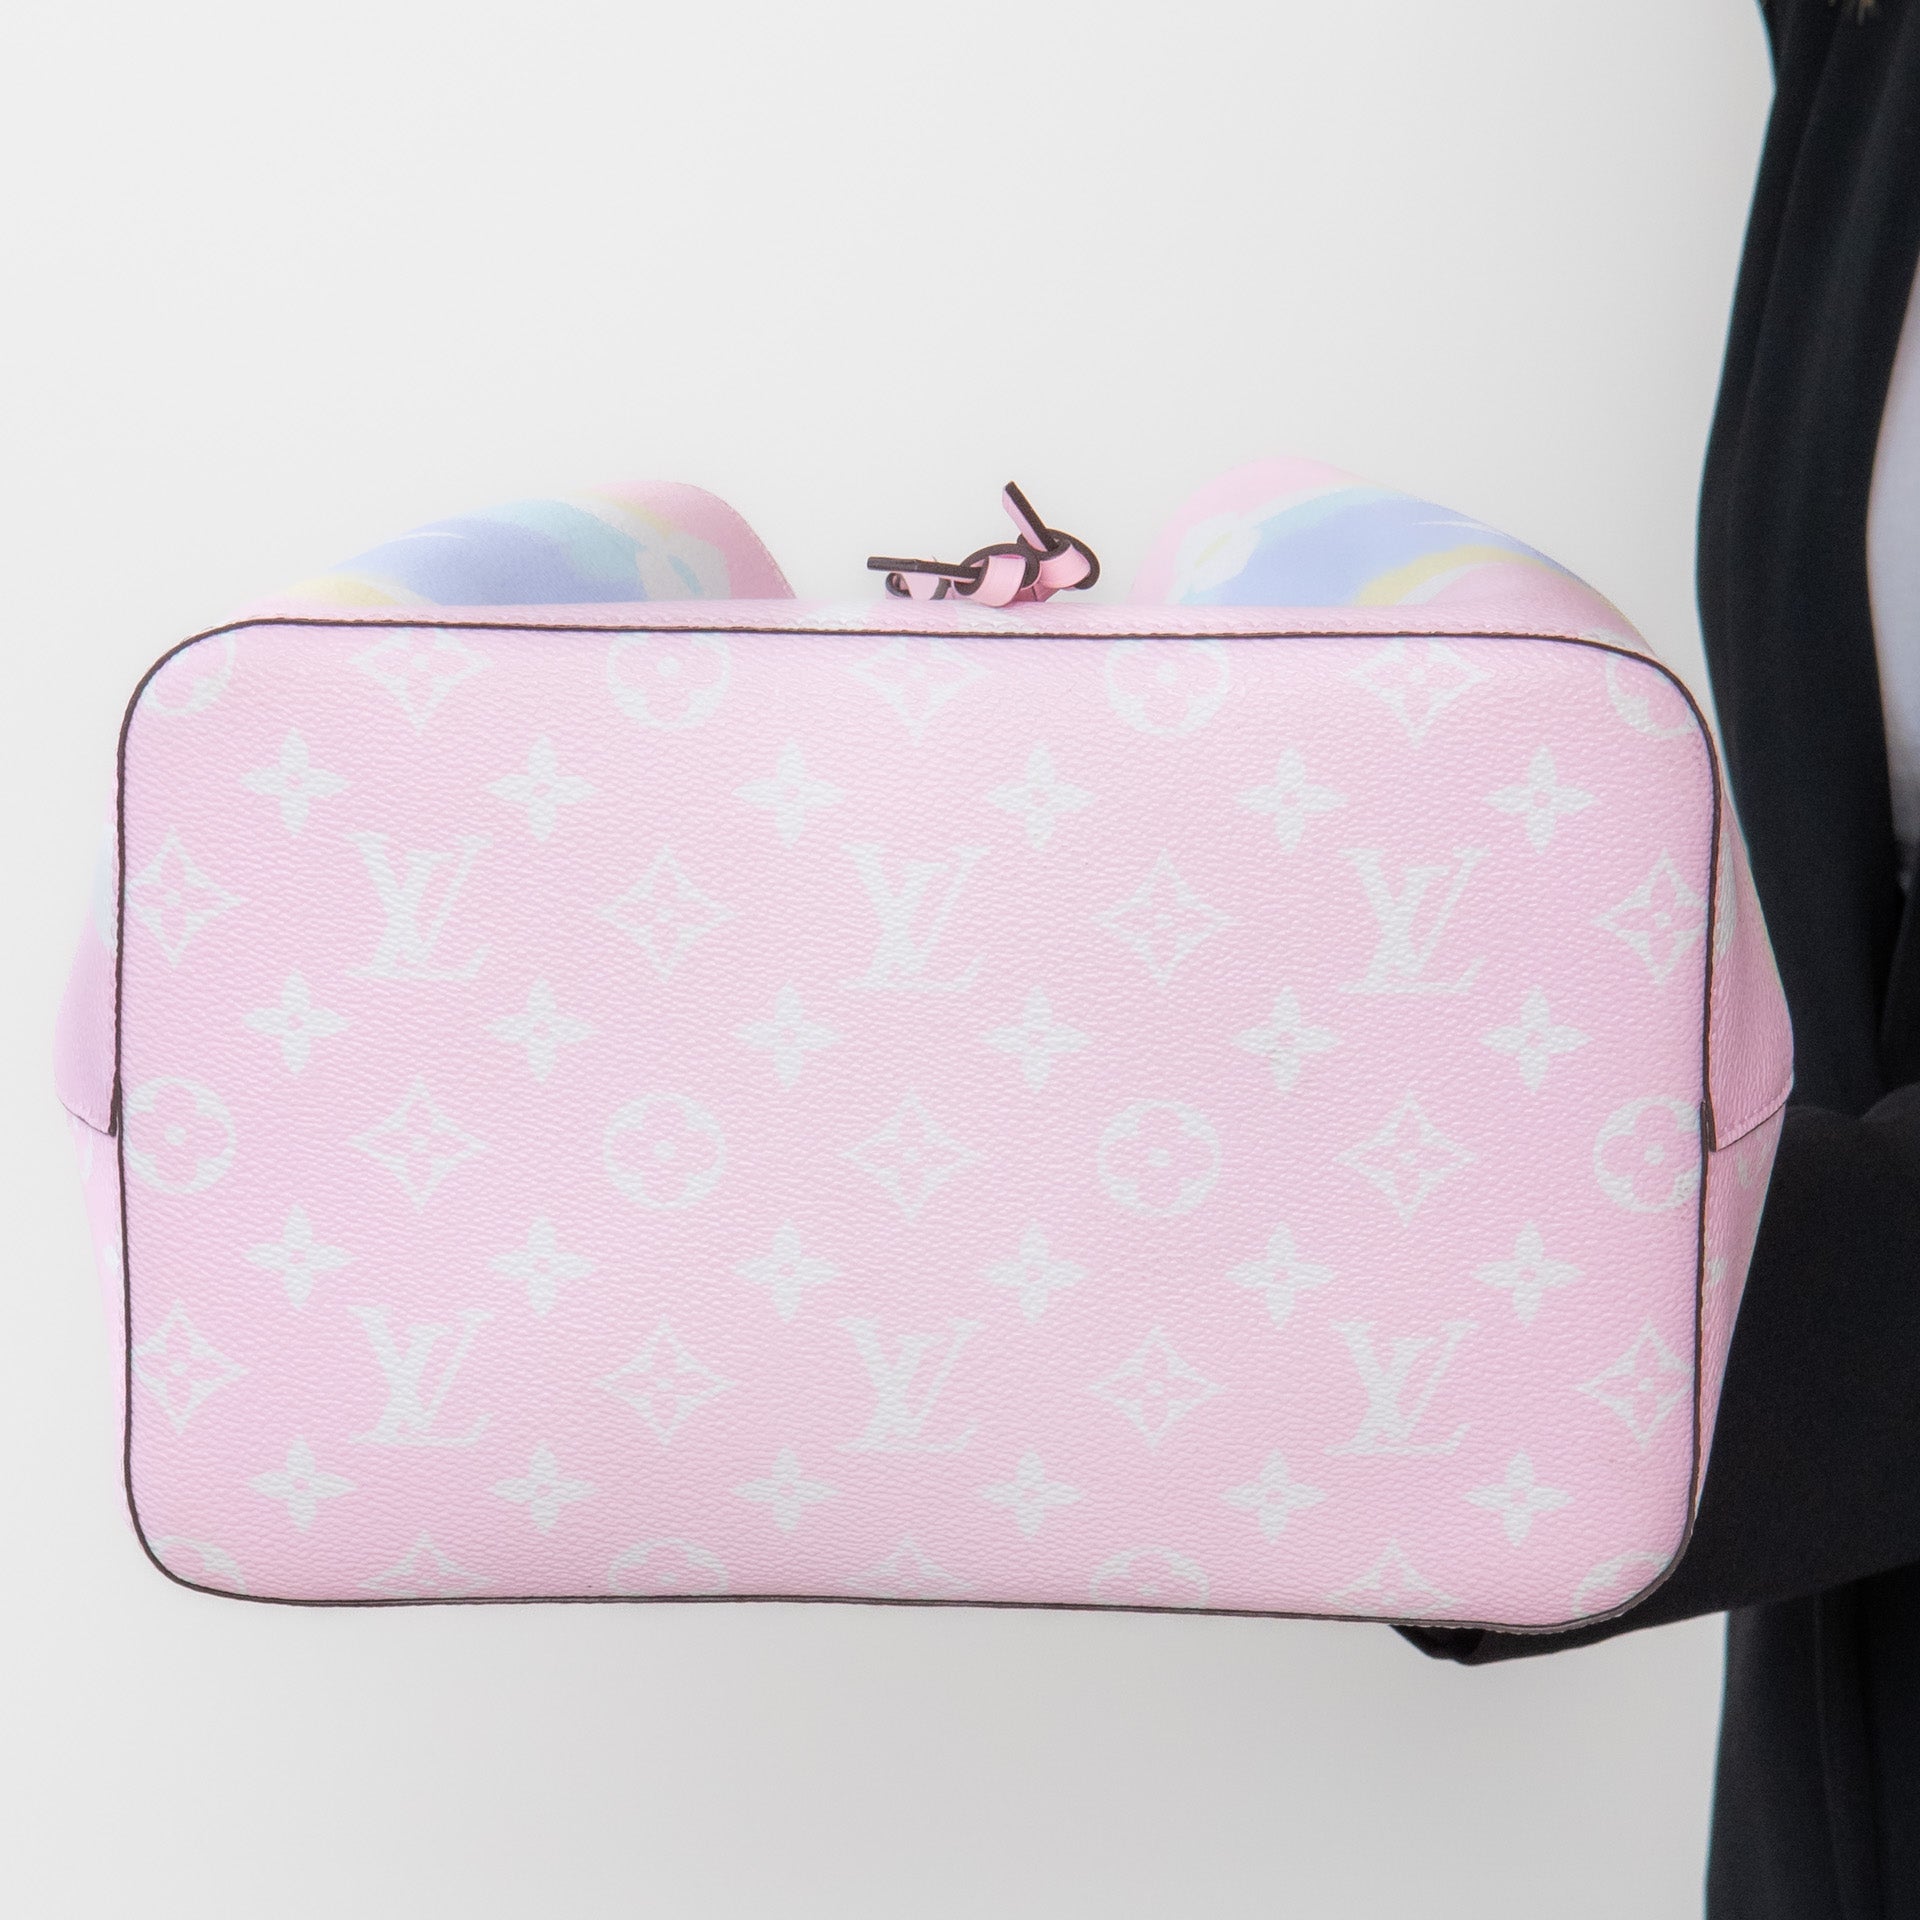 Louis Vuitton Limited Edition Neo Noe Pastel Bag - Image 4 of 12